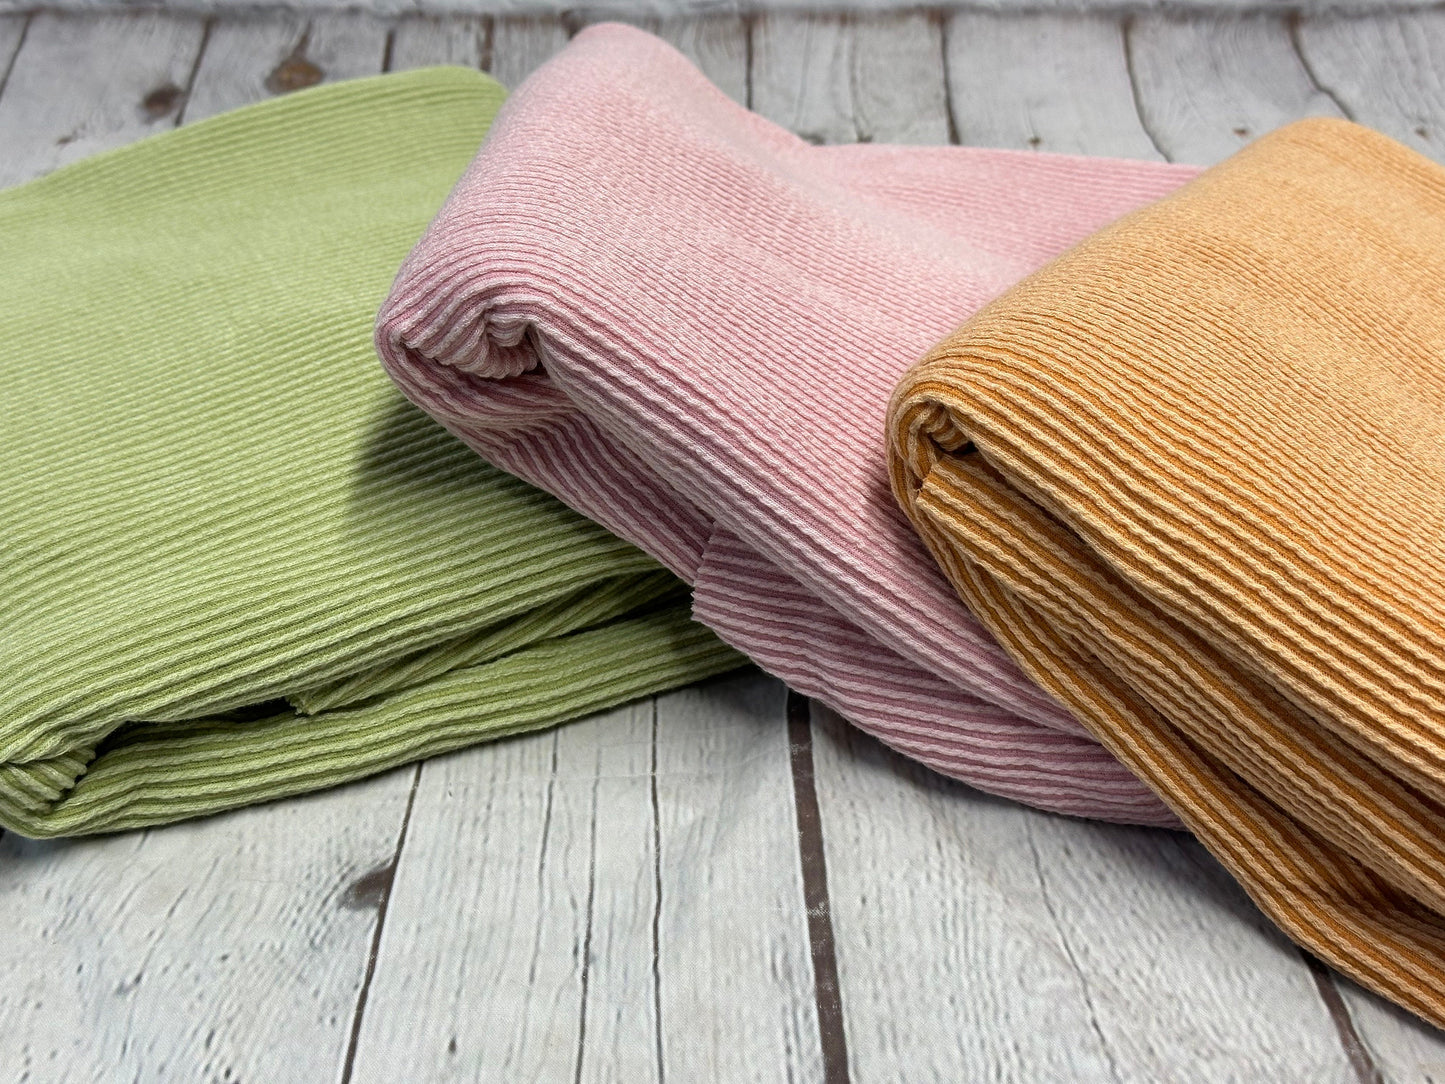 NEW COLORS! Dusty Light Color Rib Wave Knit Spandex Fabric By The Yard Cable Knit Spandex Texture Knit